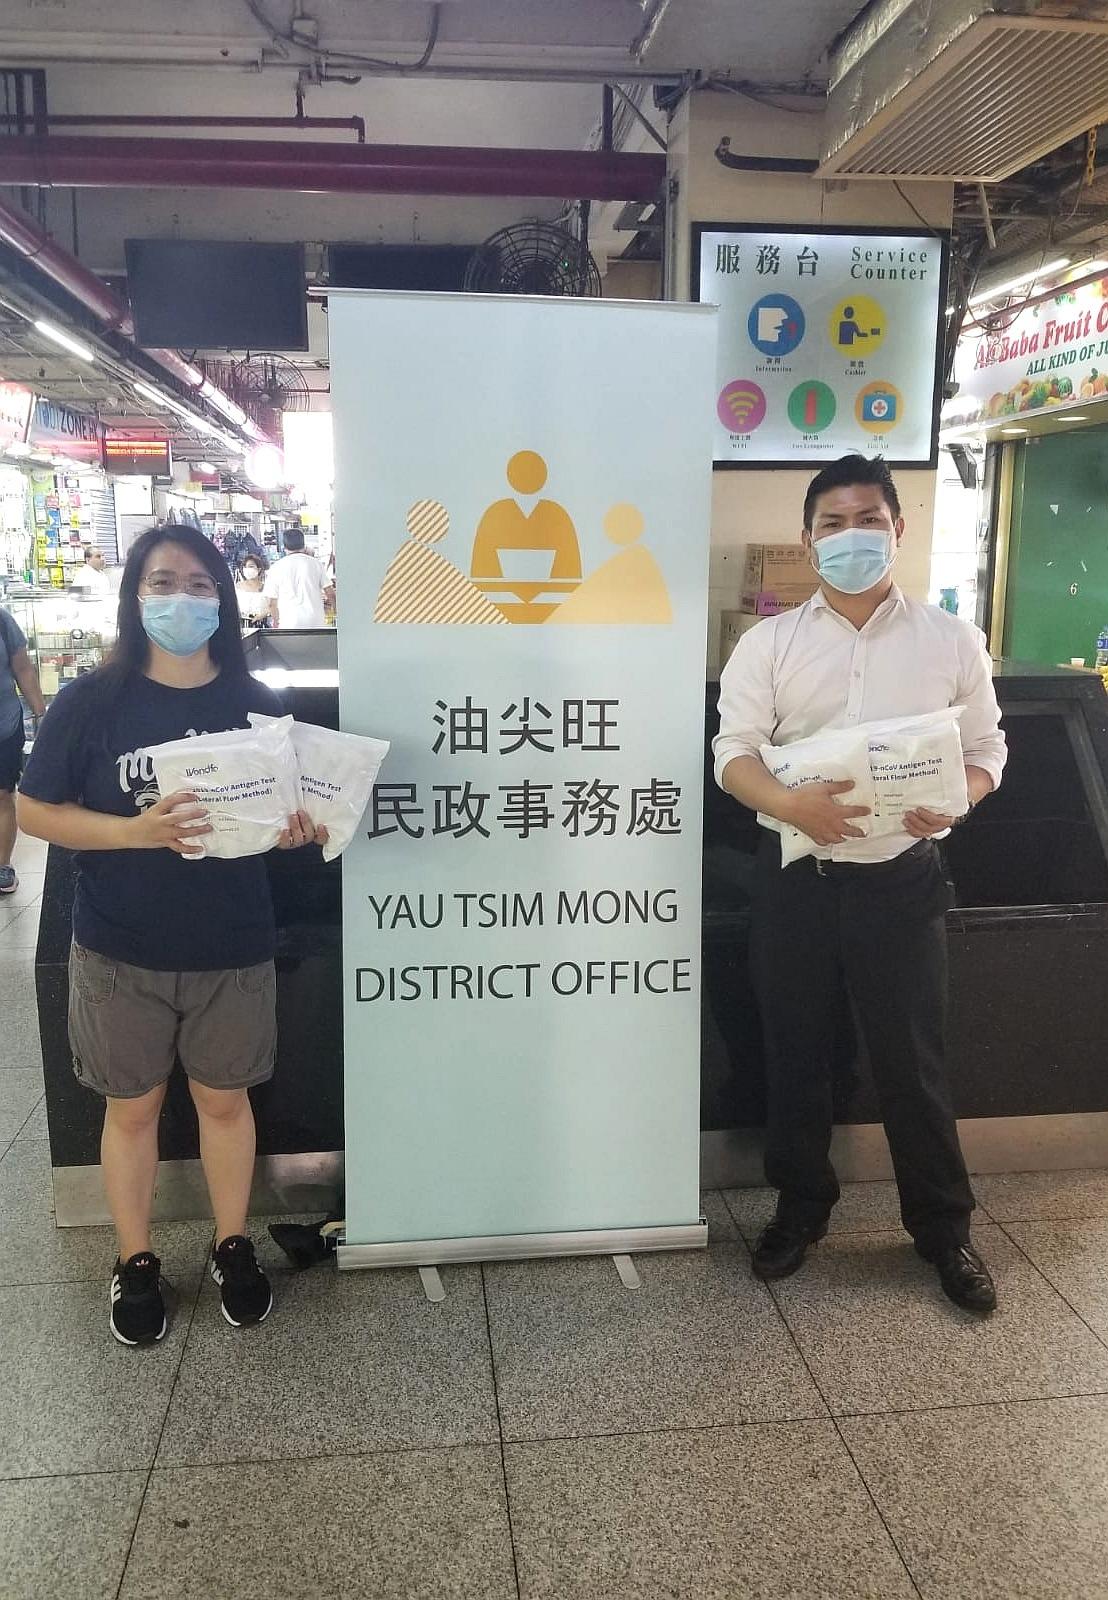 The Yau Tsim Mong District Office today (June 26) distributed COVID-19 rapid test kits to households, cleansing workers and property management staff living and working in Chungking Mansions for voluntary testing through the property management company.